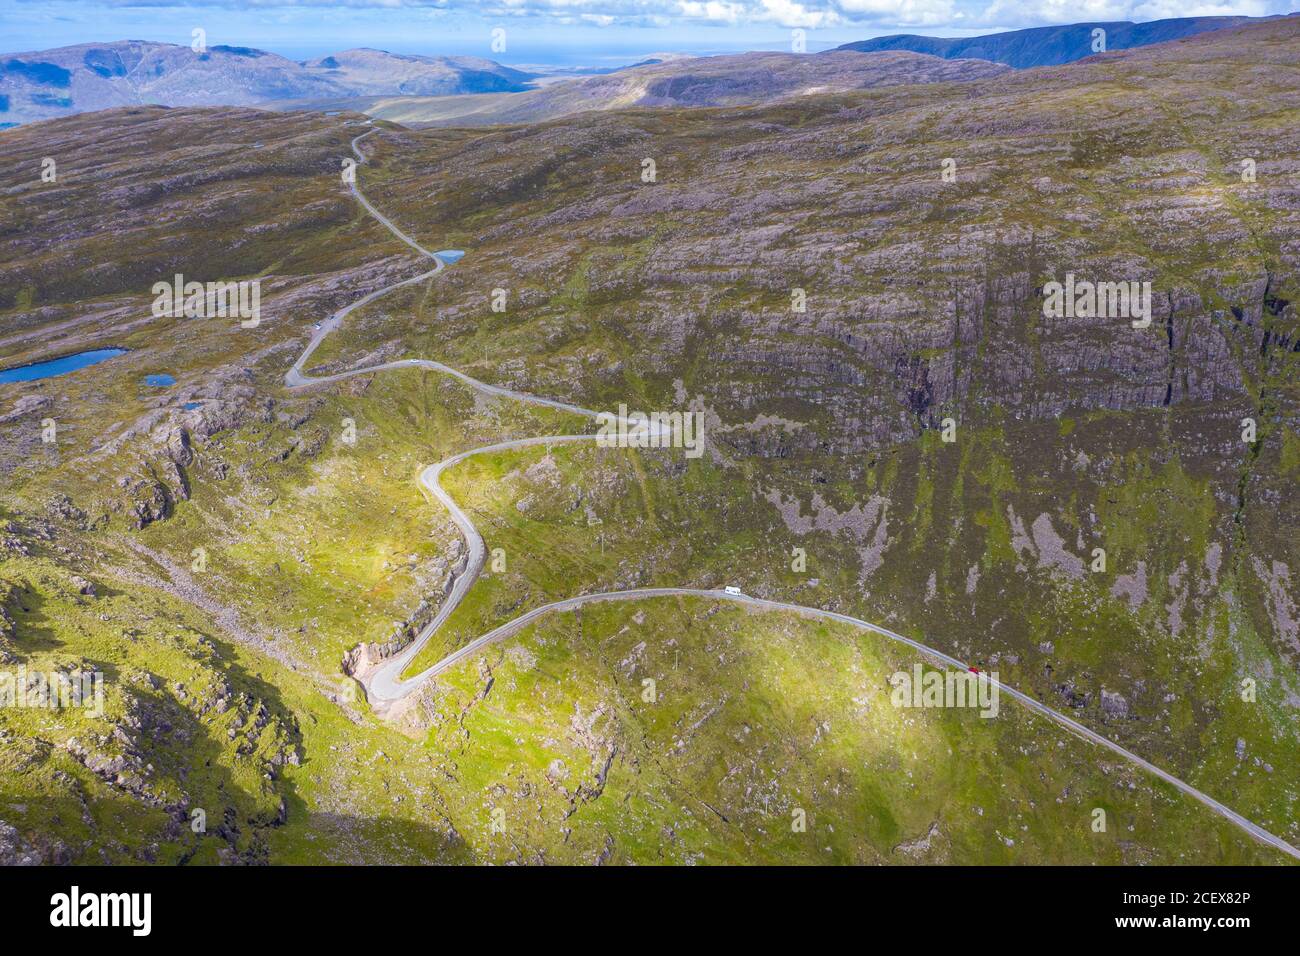 Aerial view of Bealach na Ba pass on Applecross Peninsula in Wester Ross, Scotland, UK Stock Photo